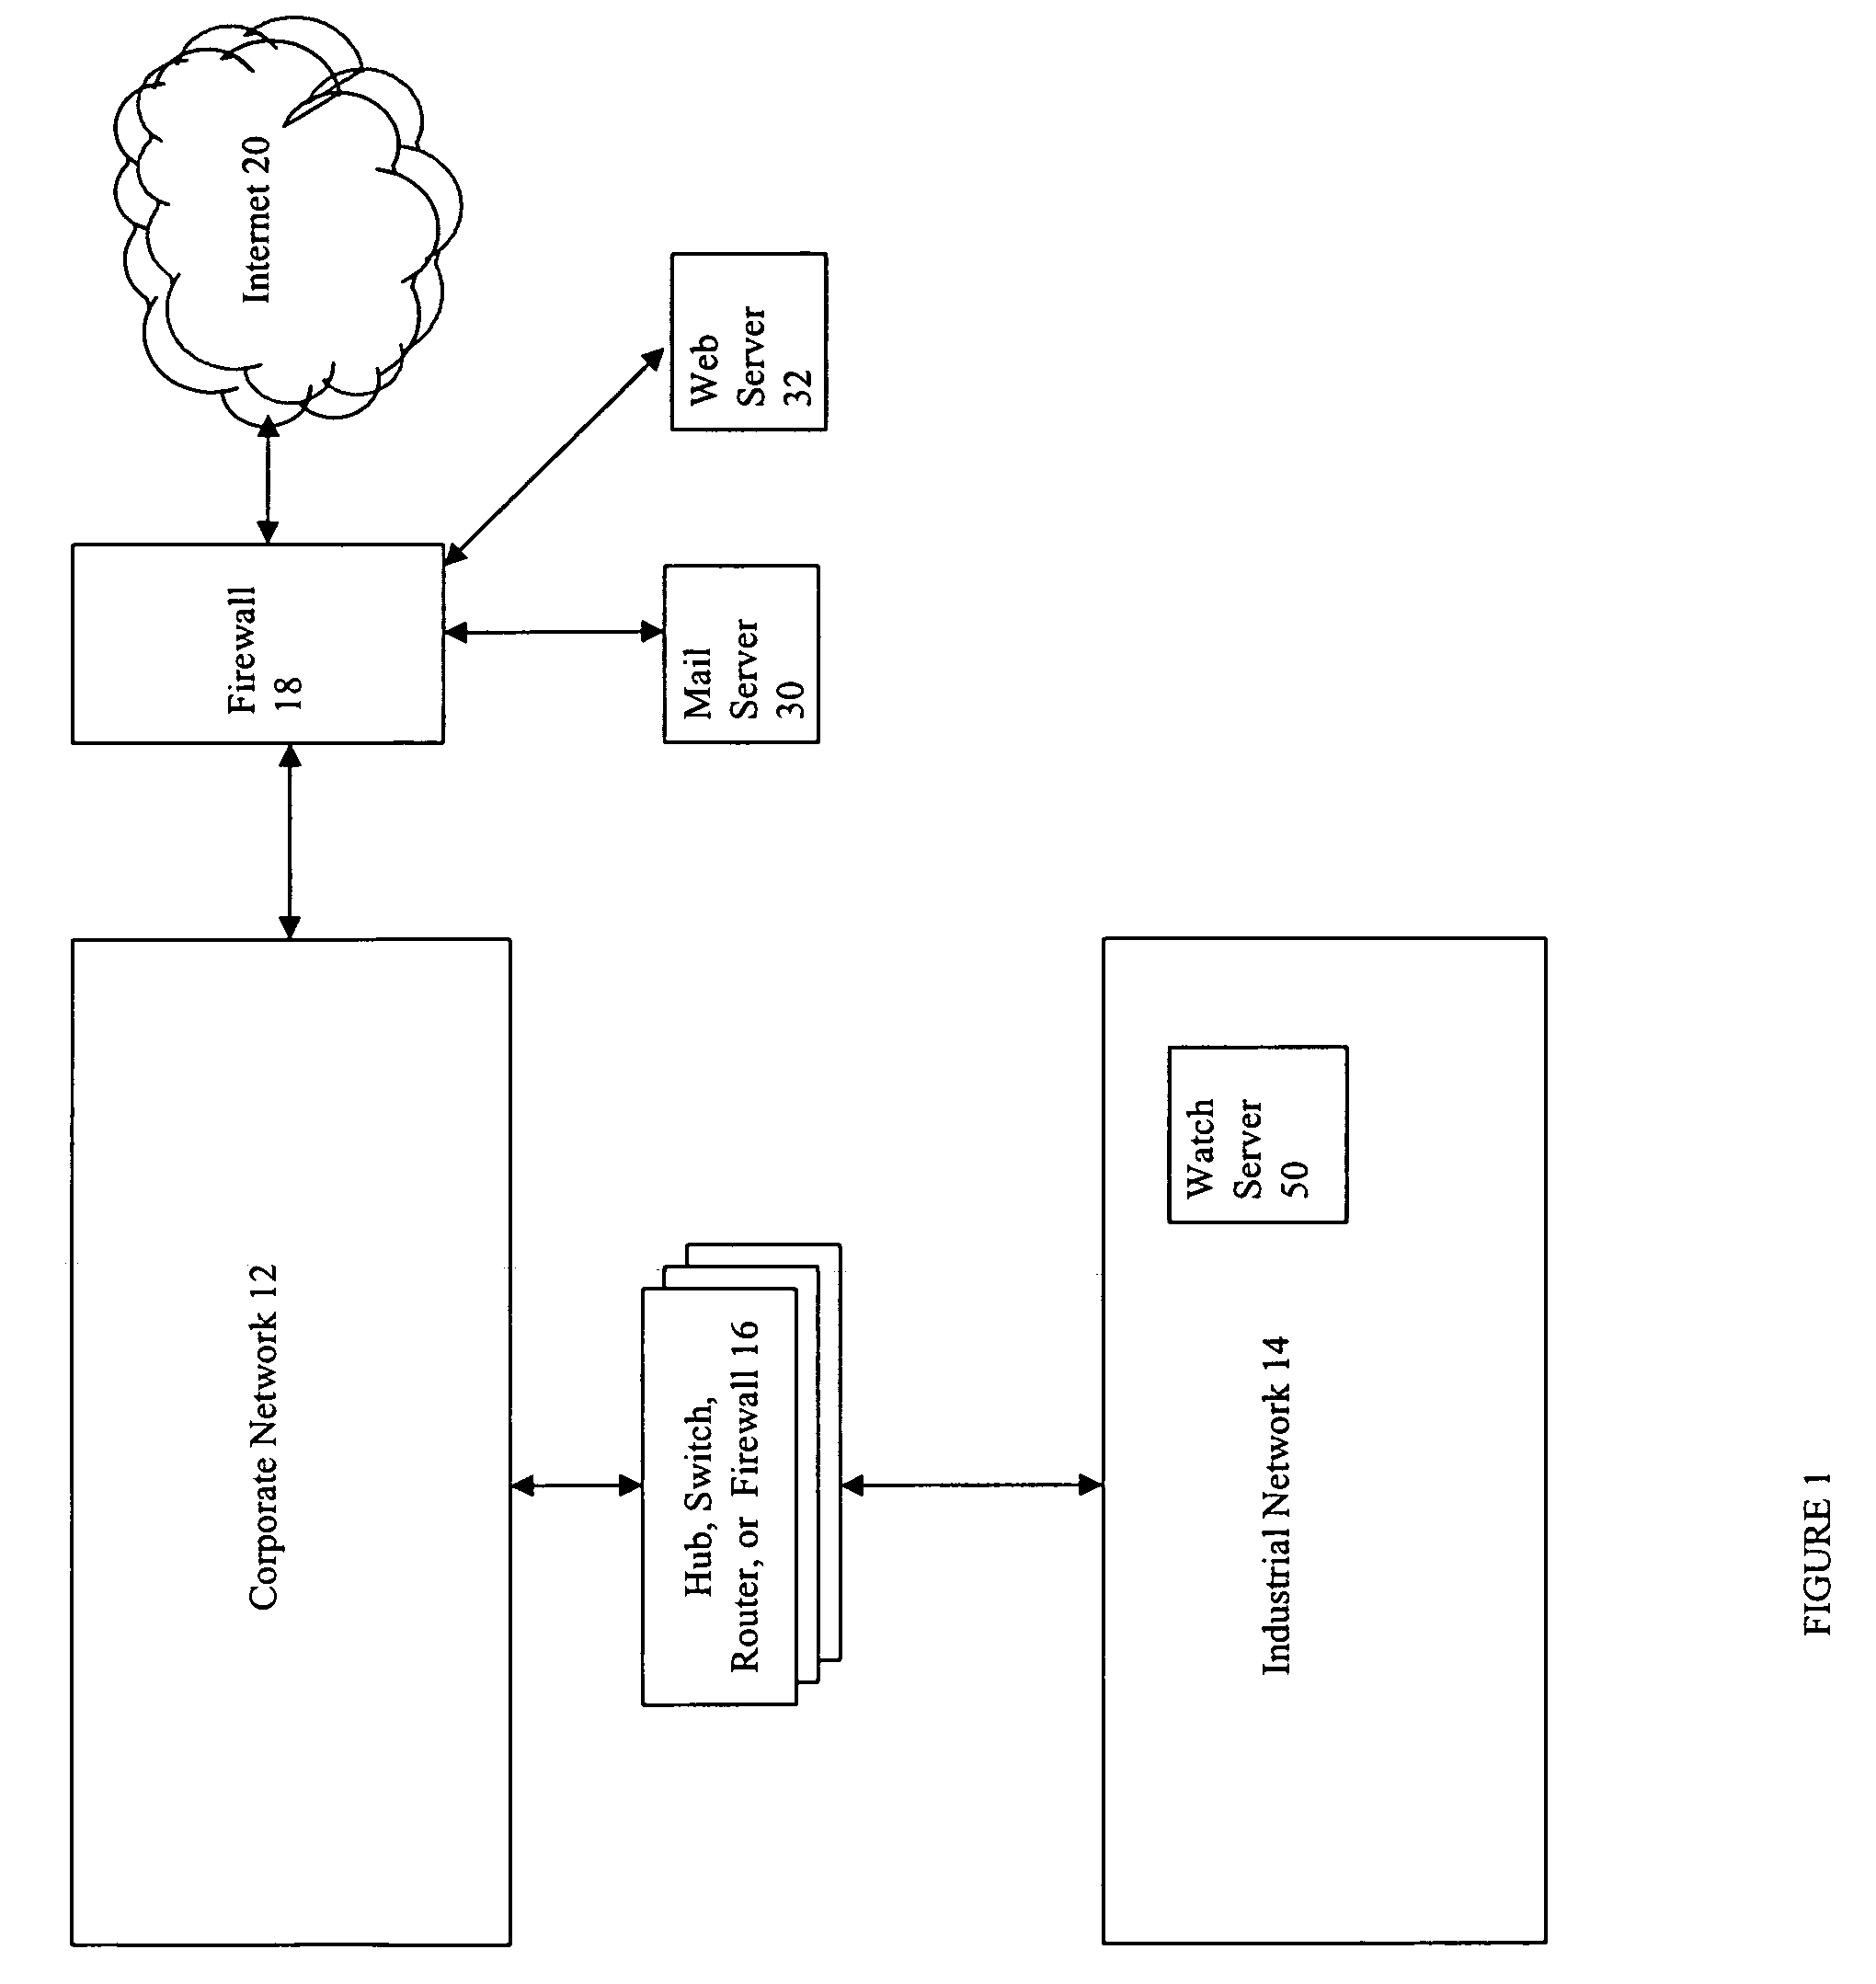 Method and computer program product for monitoring an industrial network